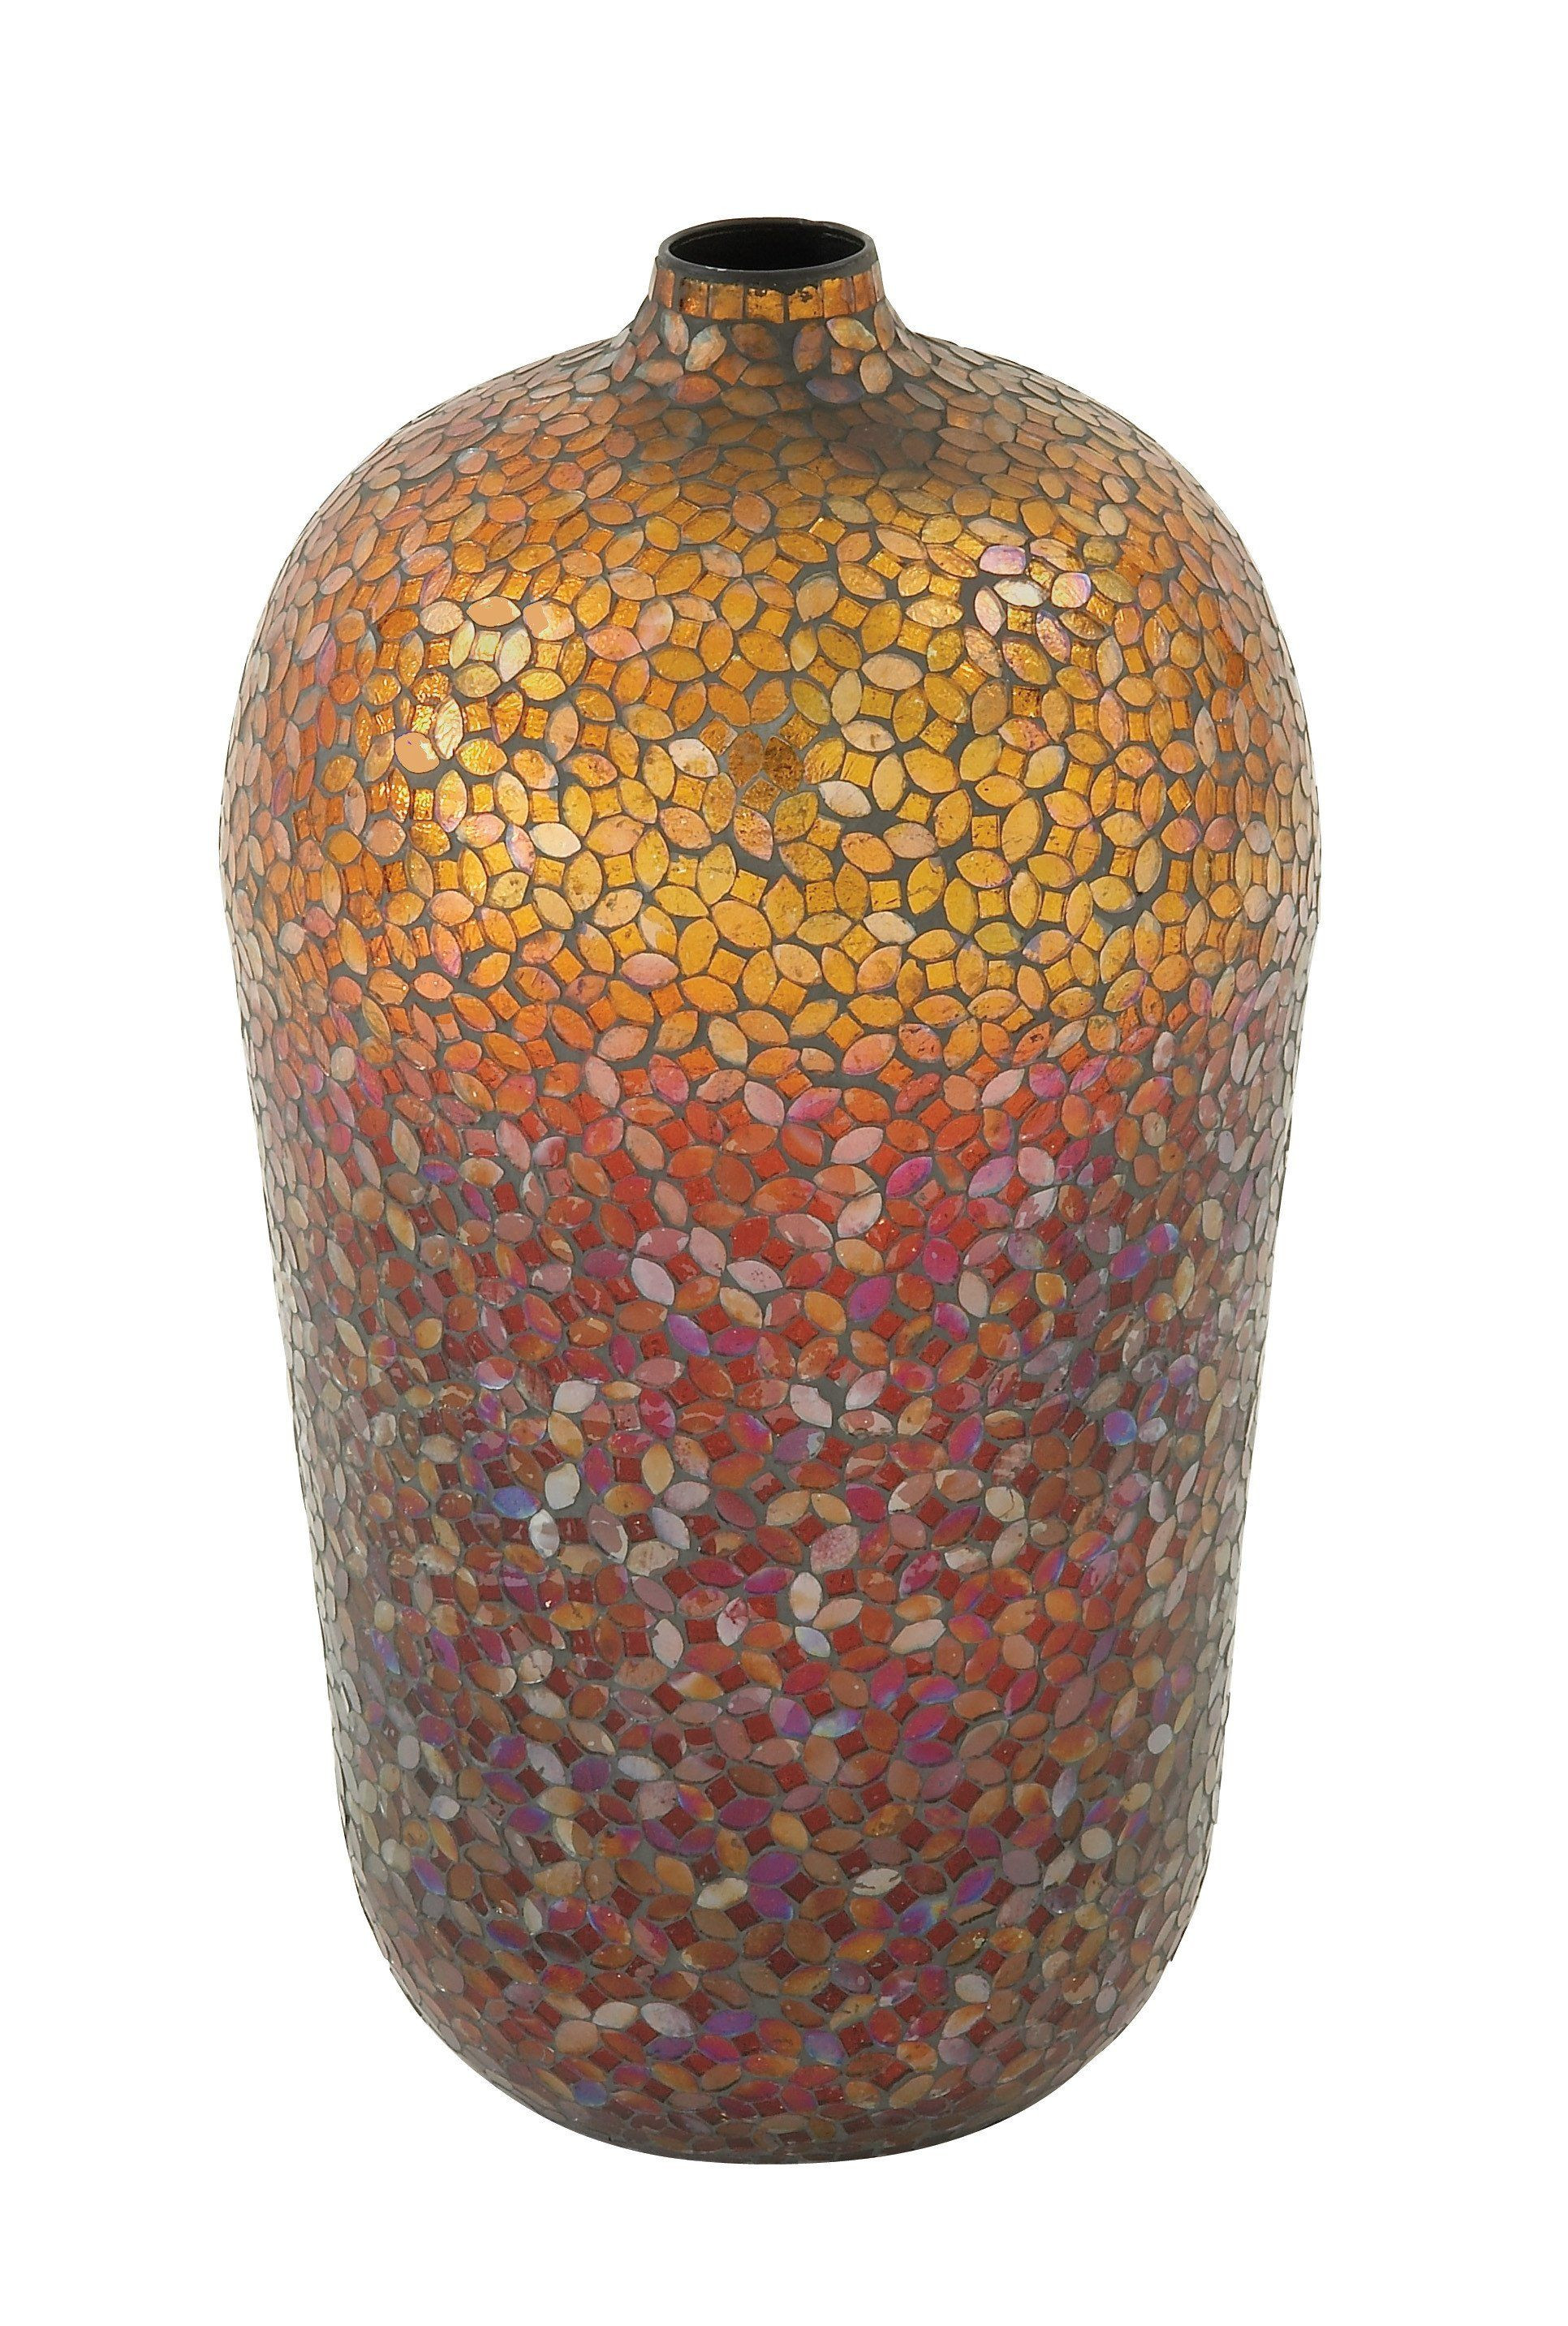 29 Spectacular Mosaic Glass Vase 2024 free download mosaic glass vase of sassy metal mosaic vase products pinterest products within sassy metal mosaic vase